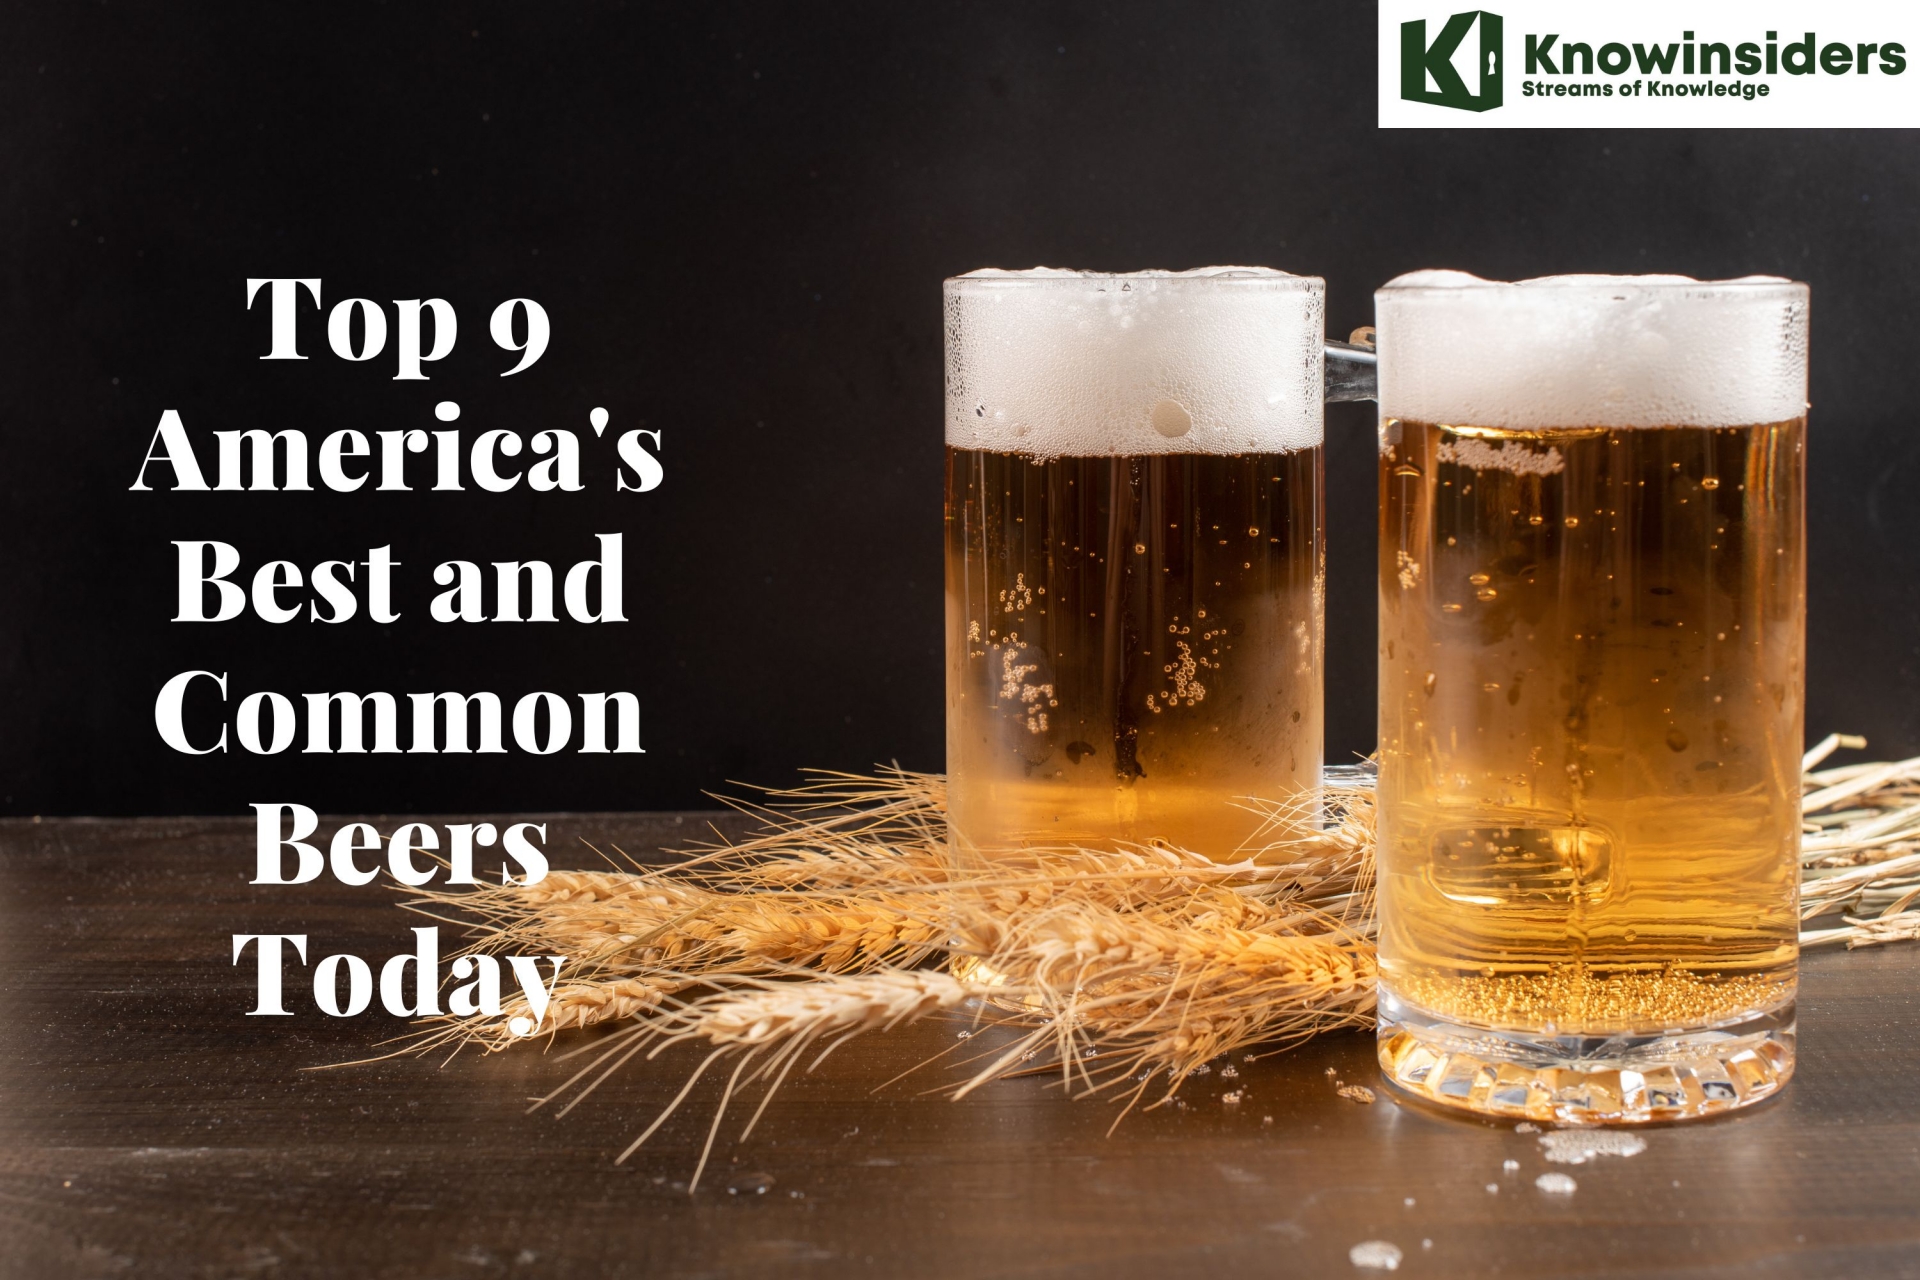 Top 9 America's Best and Common Beers Today